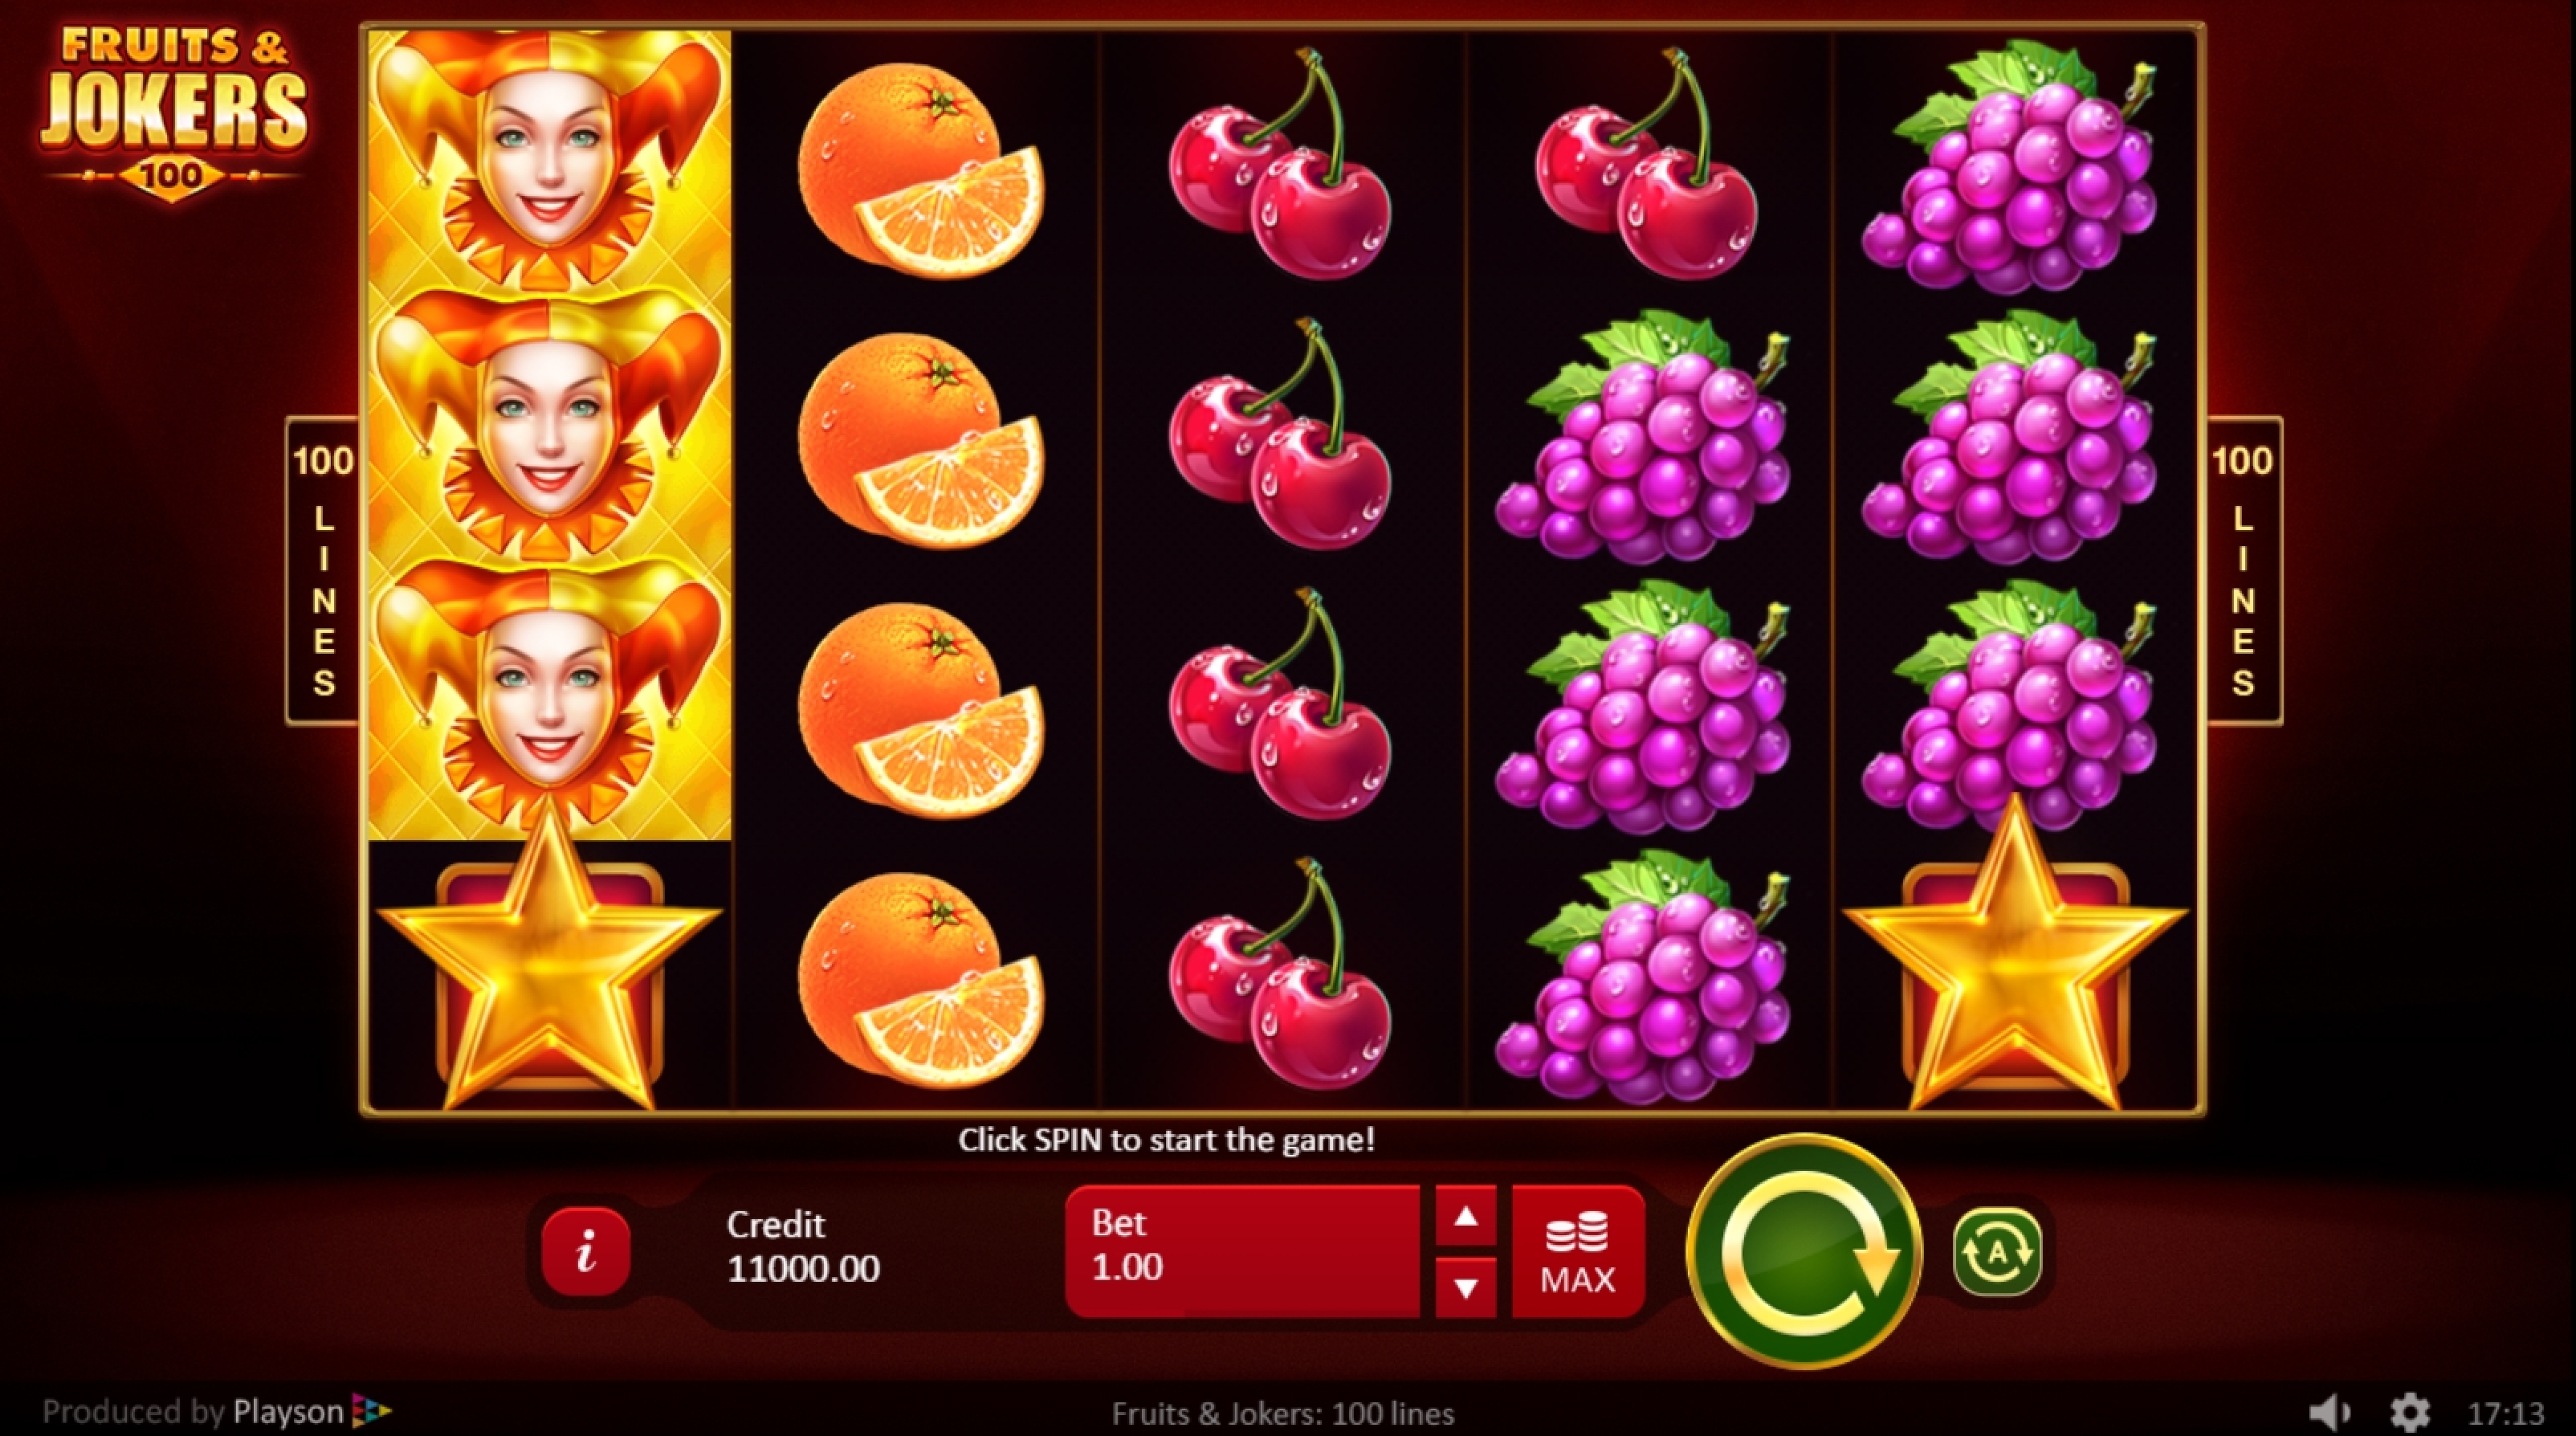 Reels in Fruits & Jokers: 100 lines Slot Game by Playson